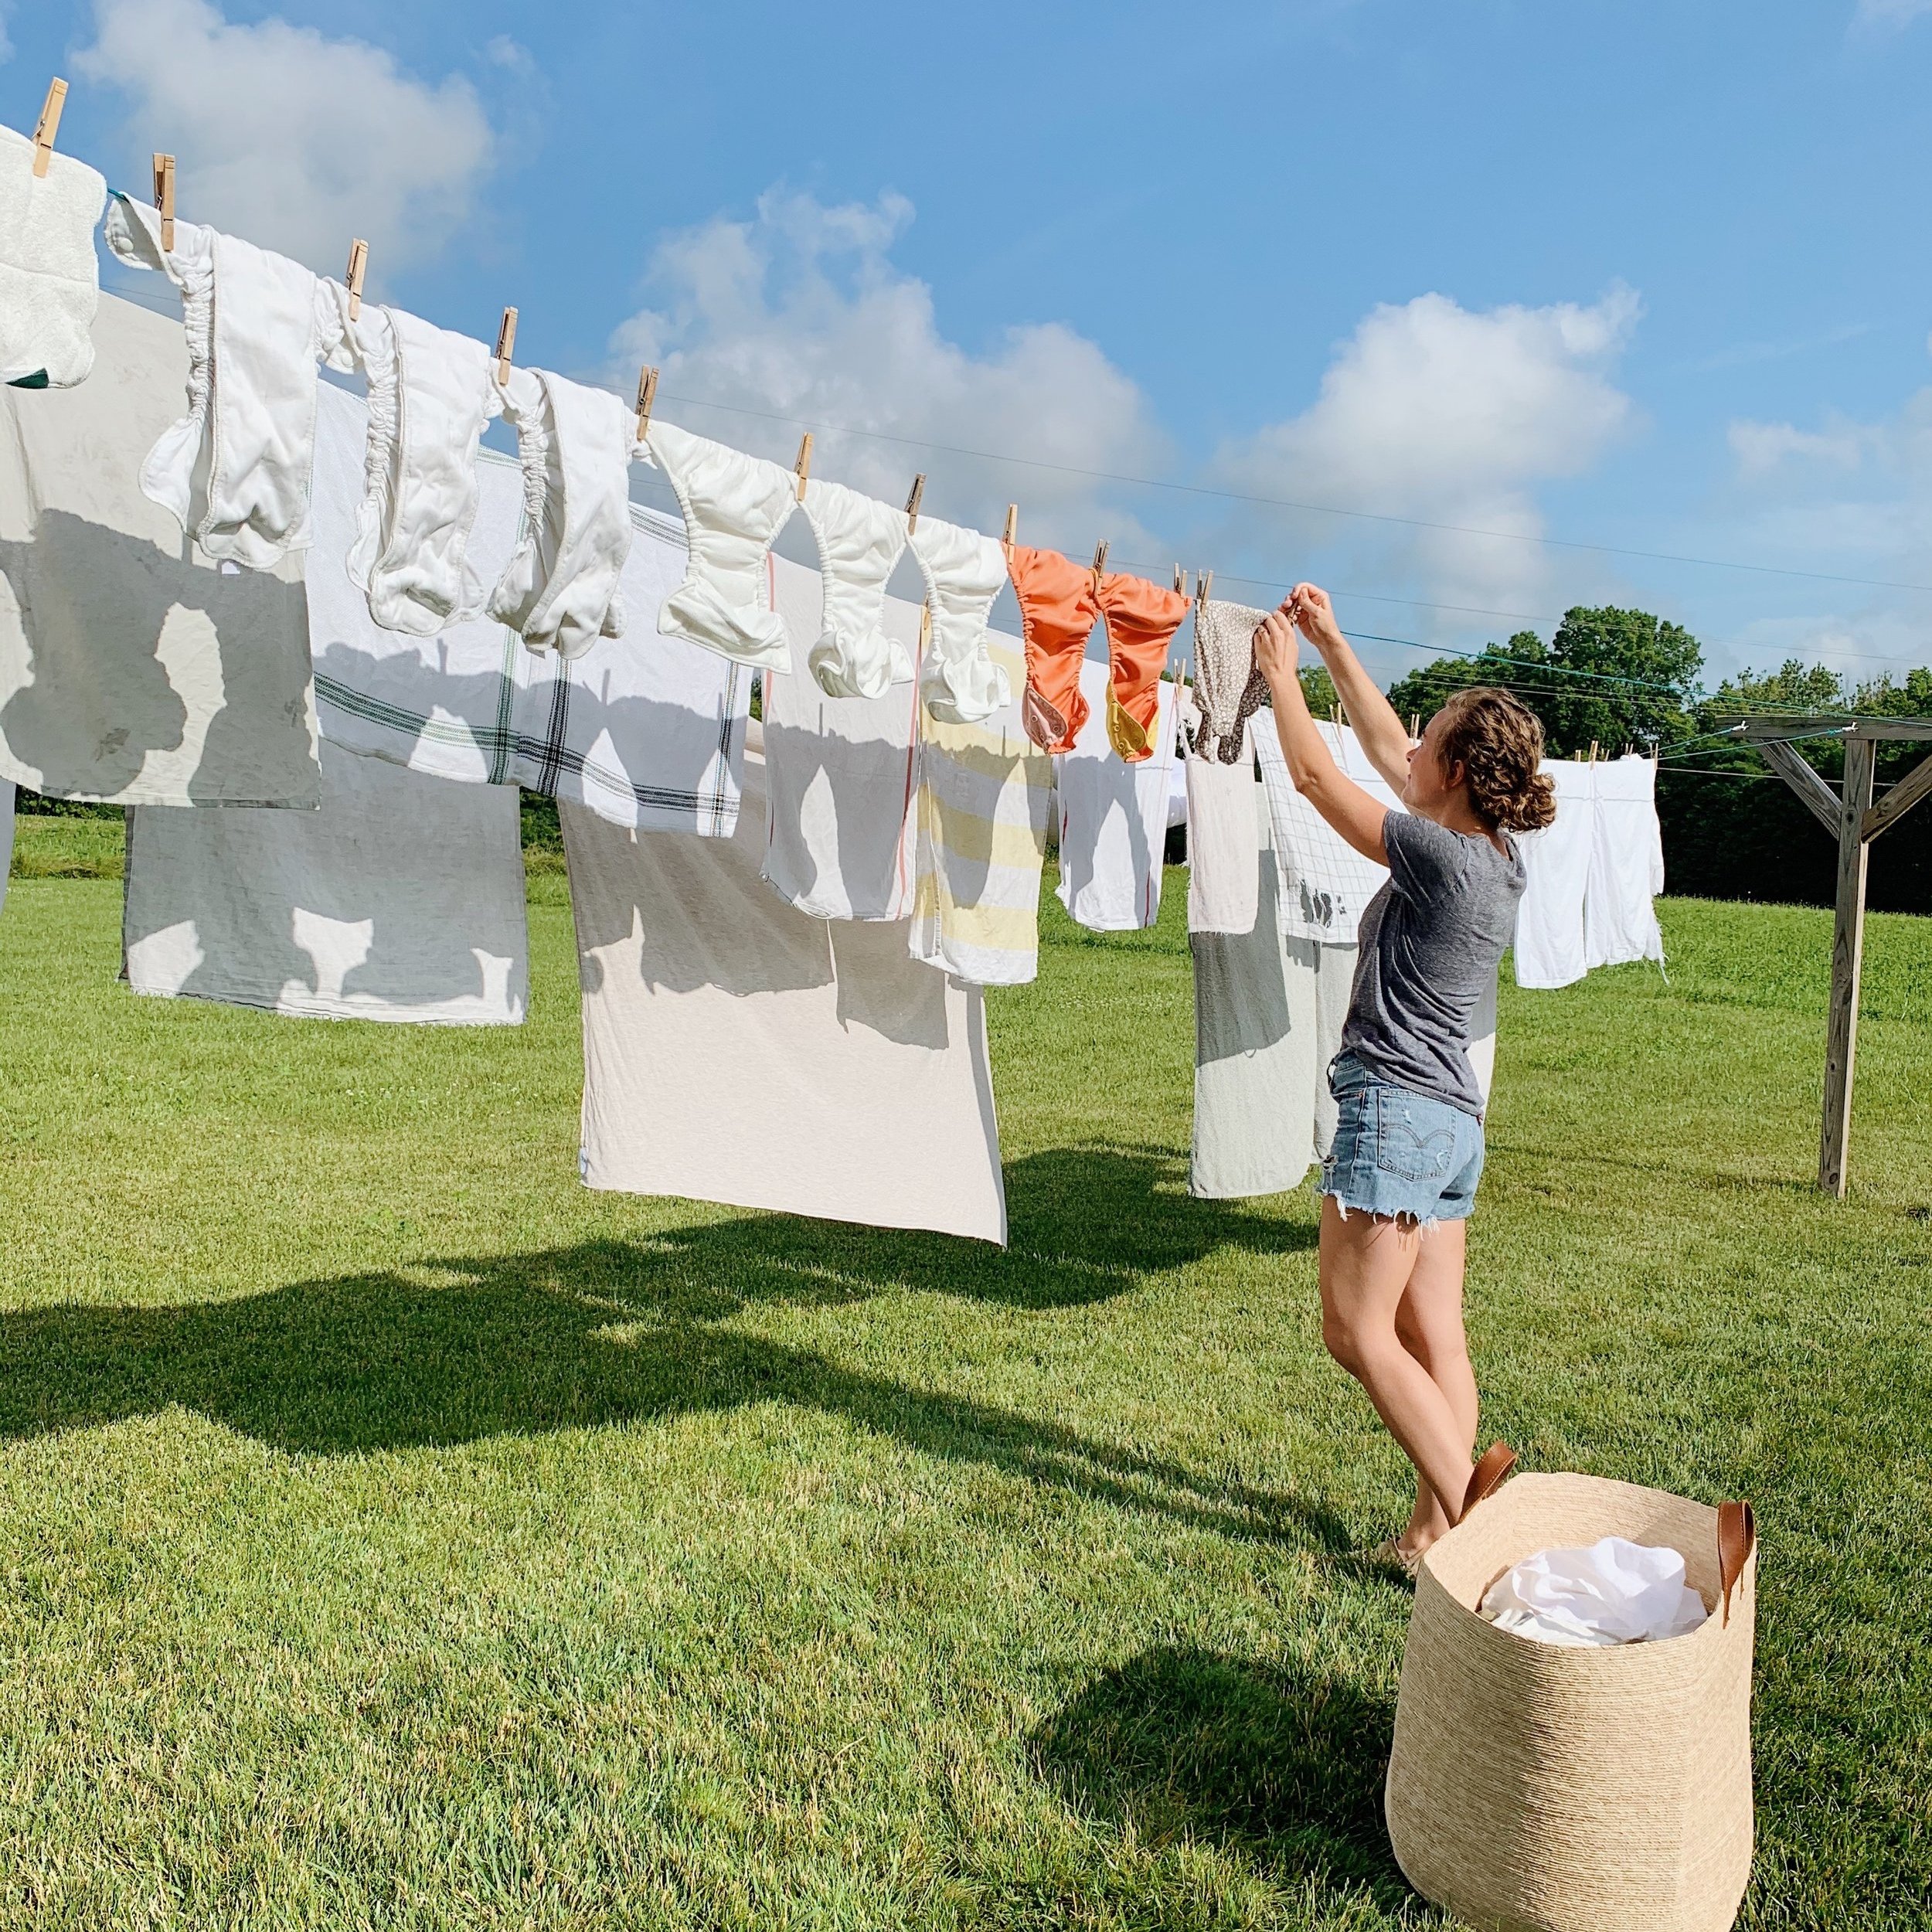 11 DIY Clothesline Ideas For Inside And Outside, 51% OFF